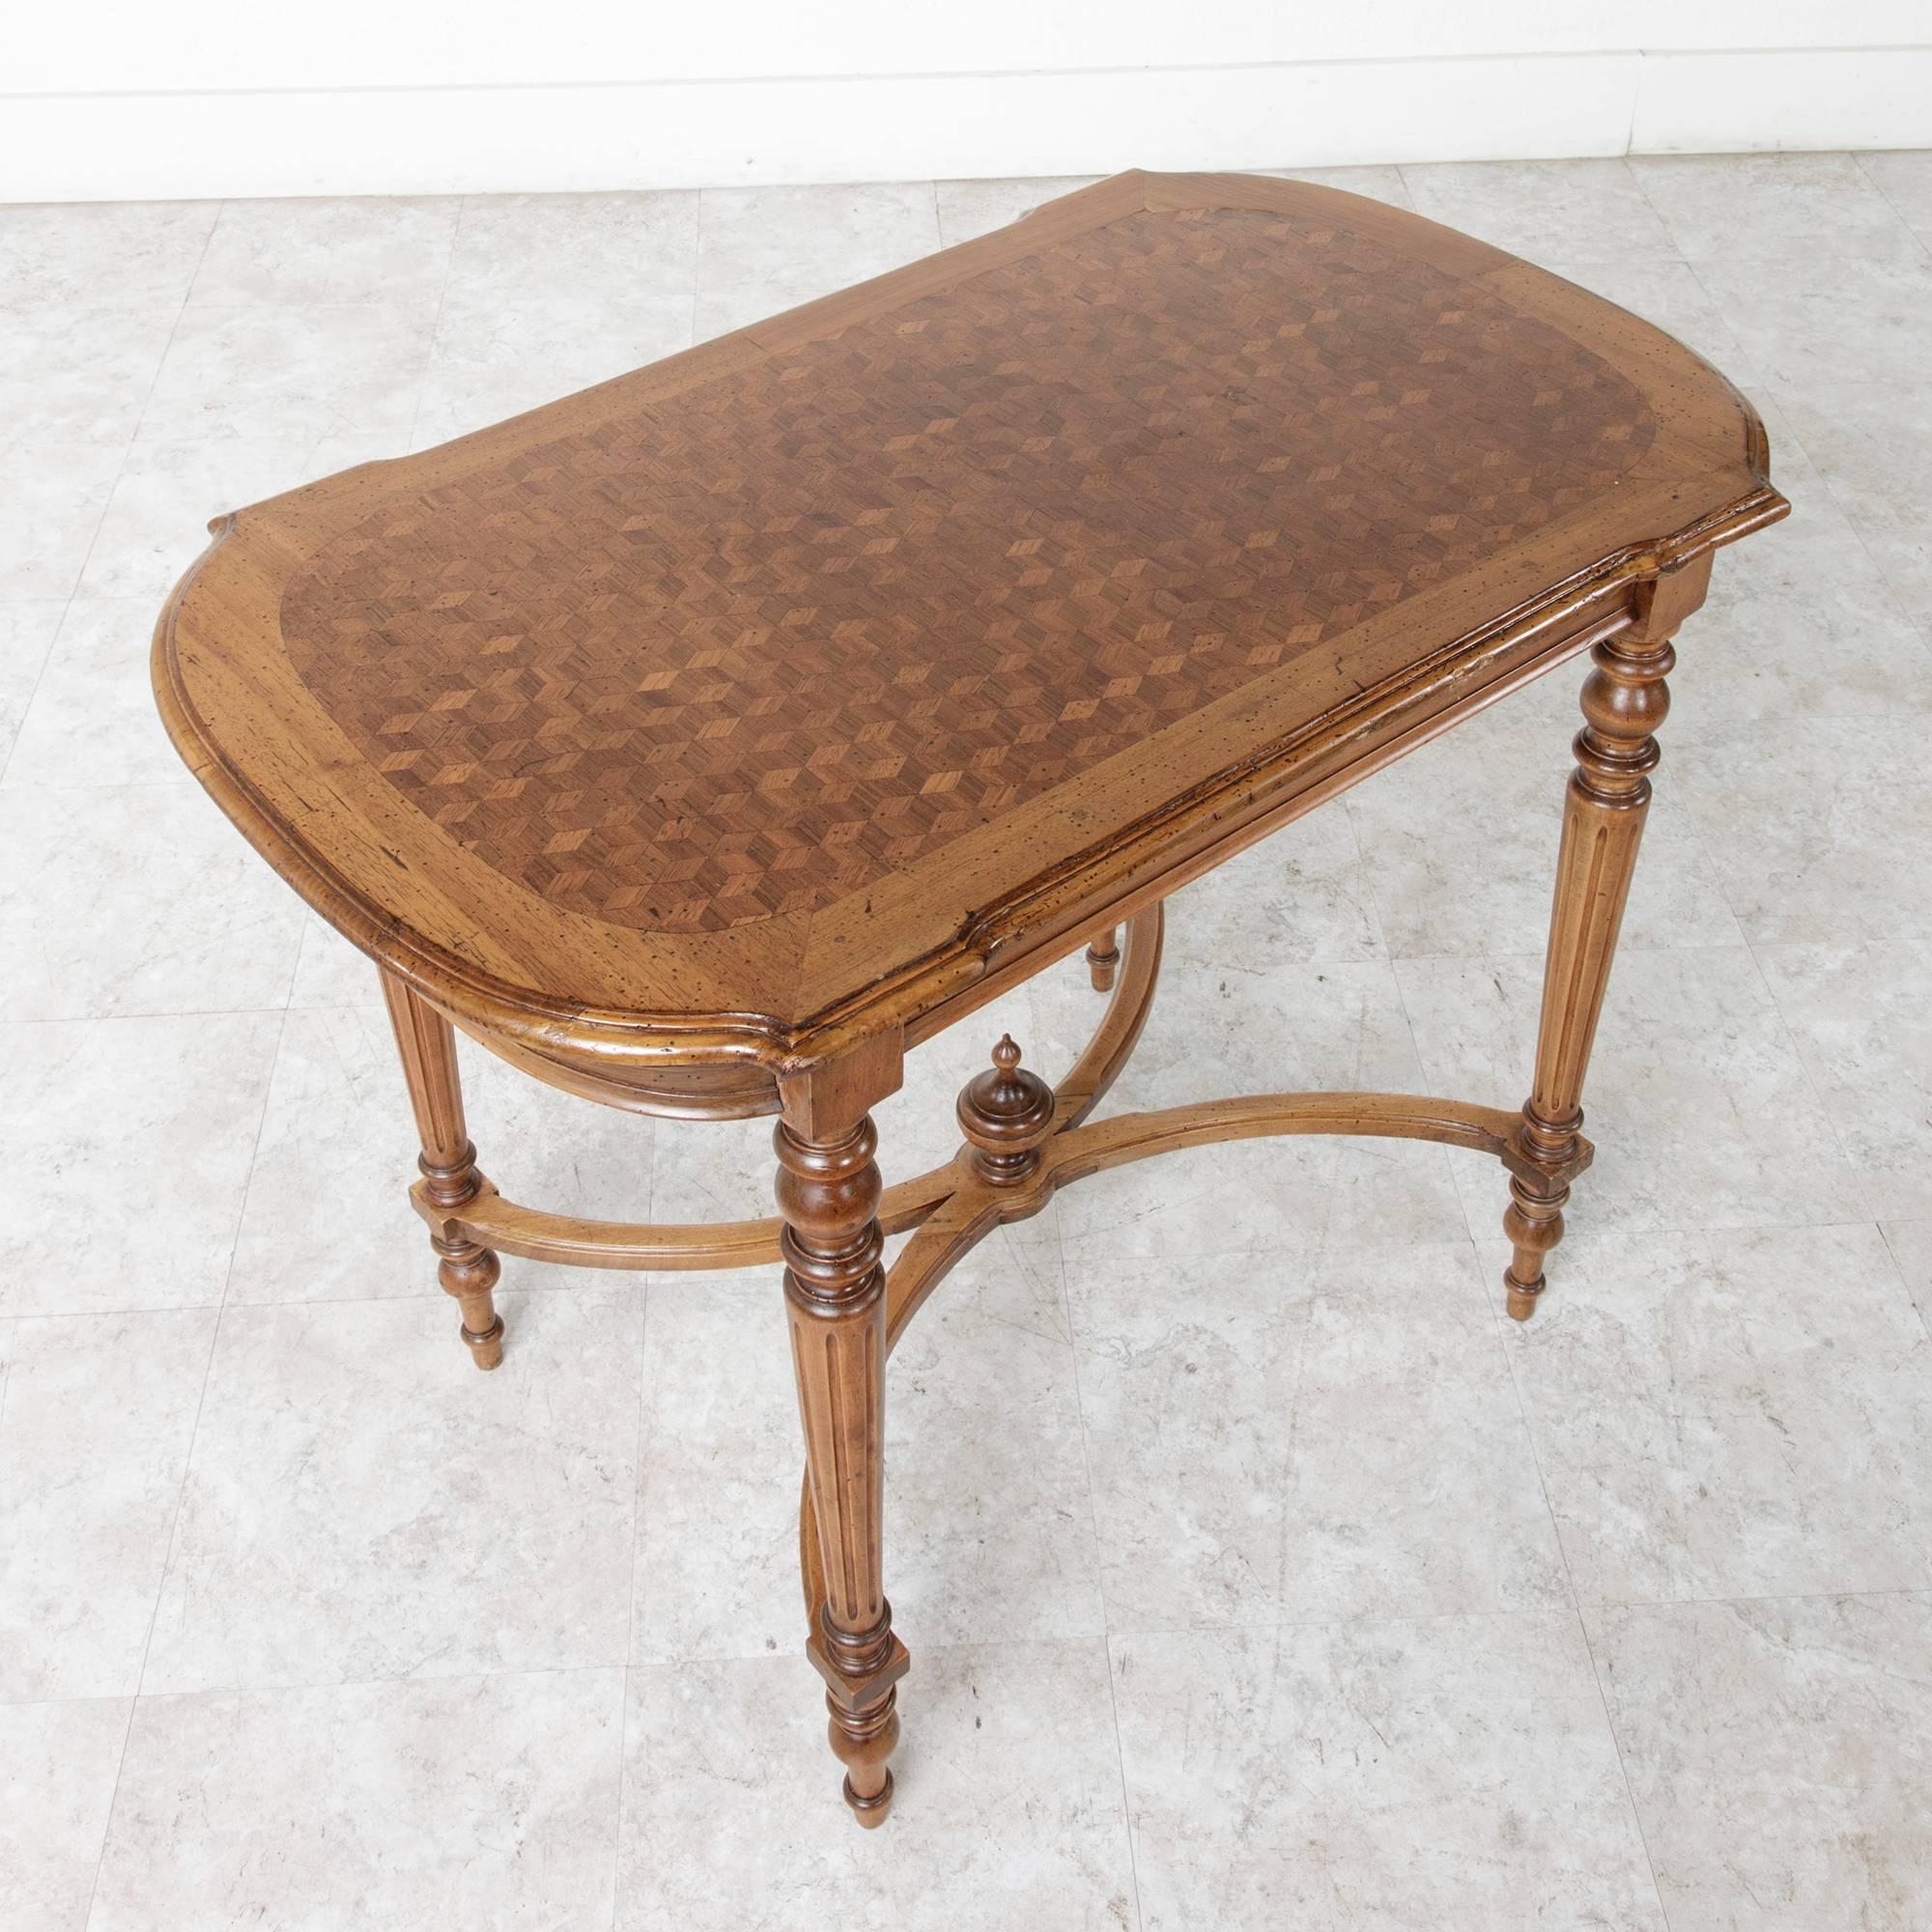 French 19th Century Louis XVI Style Blond Mahogany Geometric Marquetry Side Table, Desk